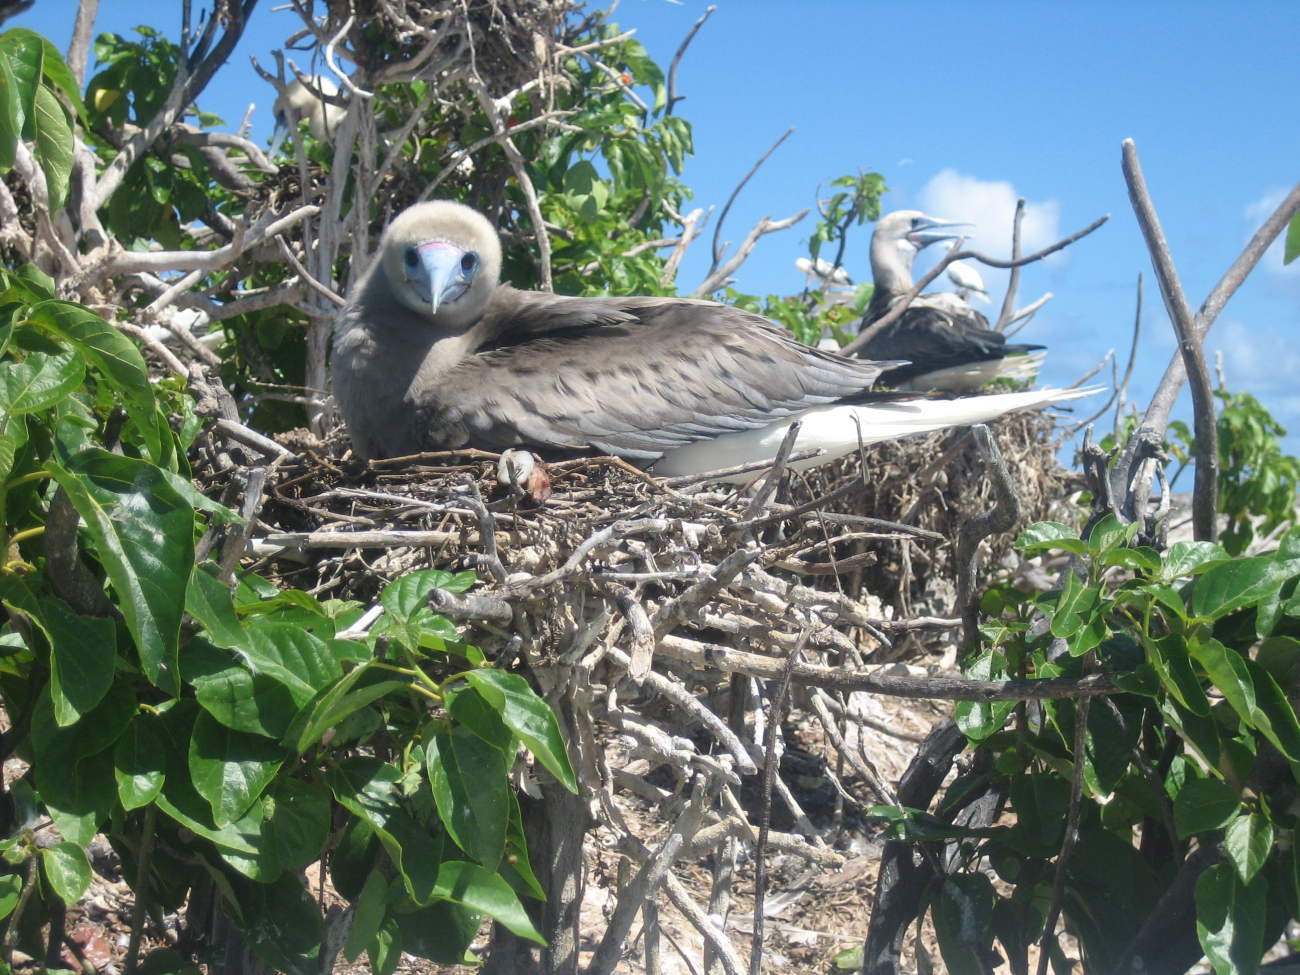 Booby chick that has nearly outgrown the nest